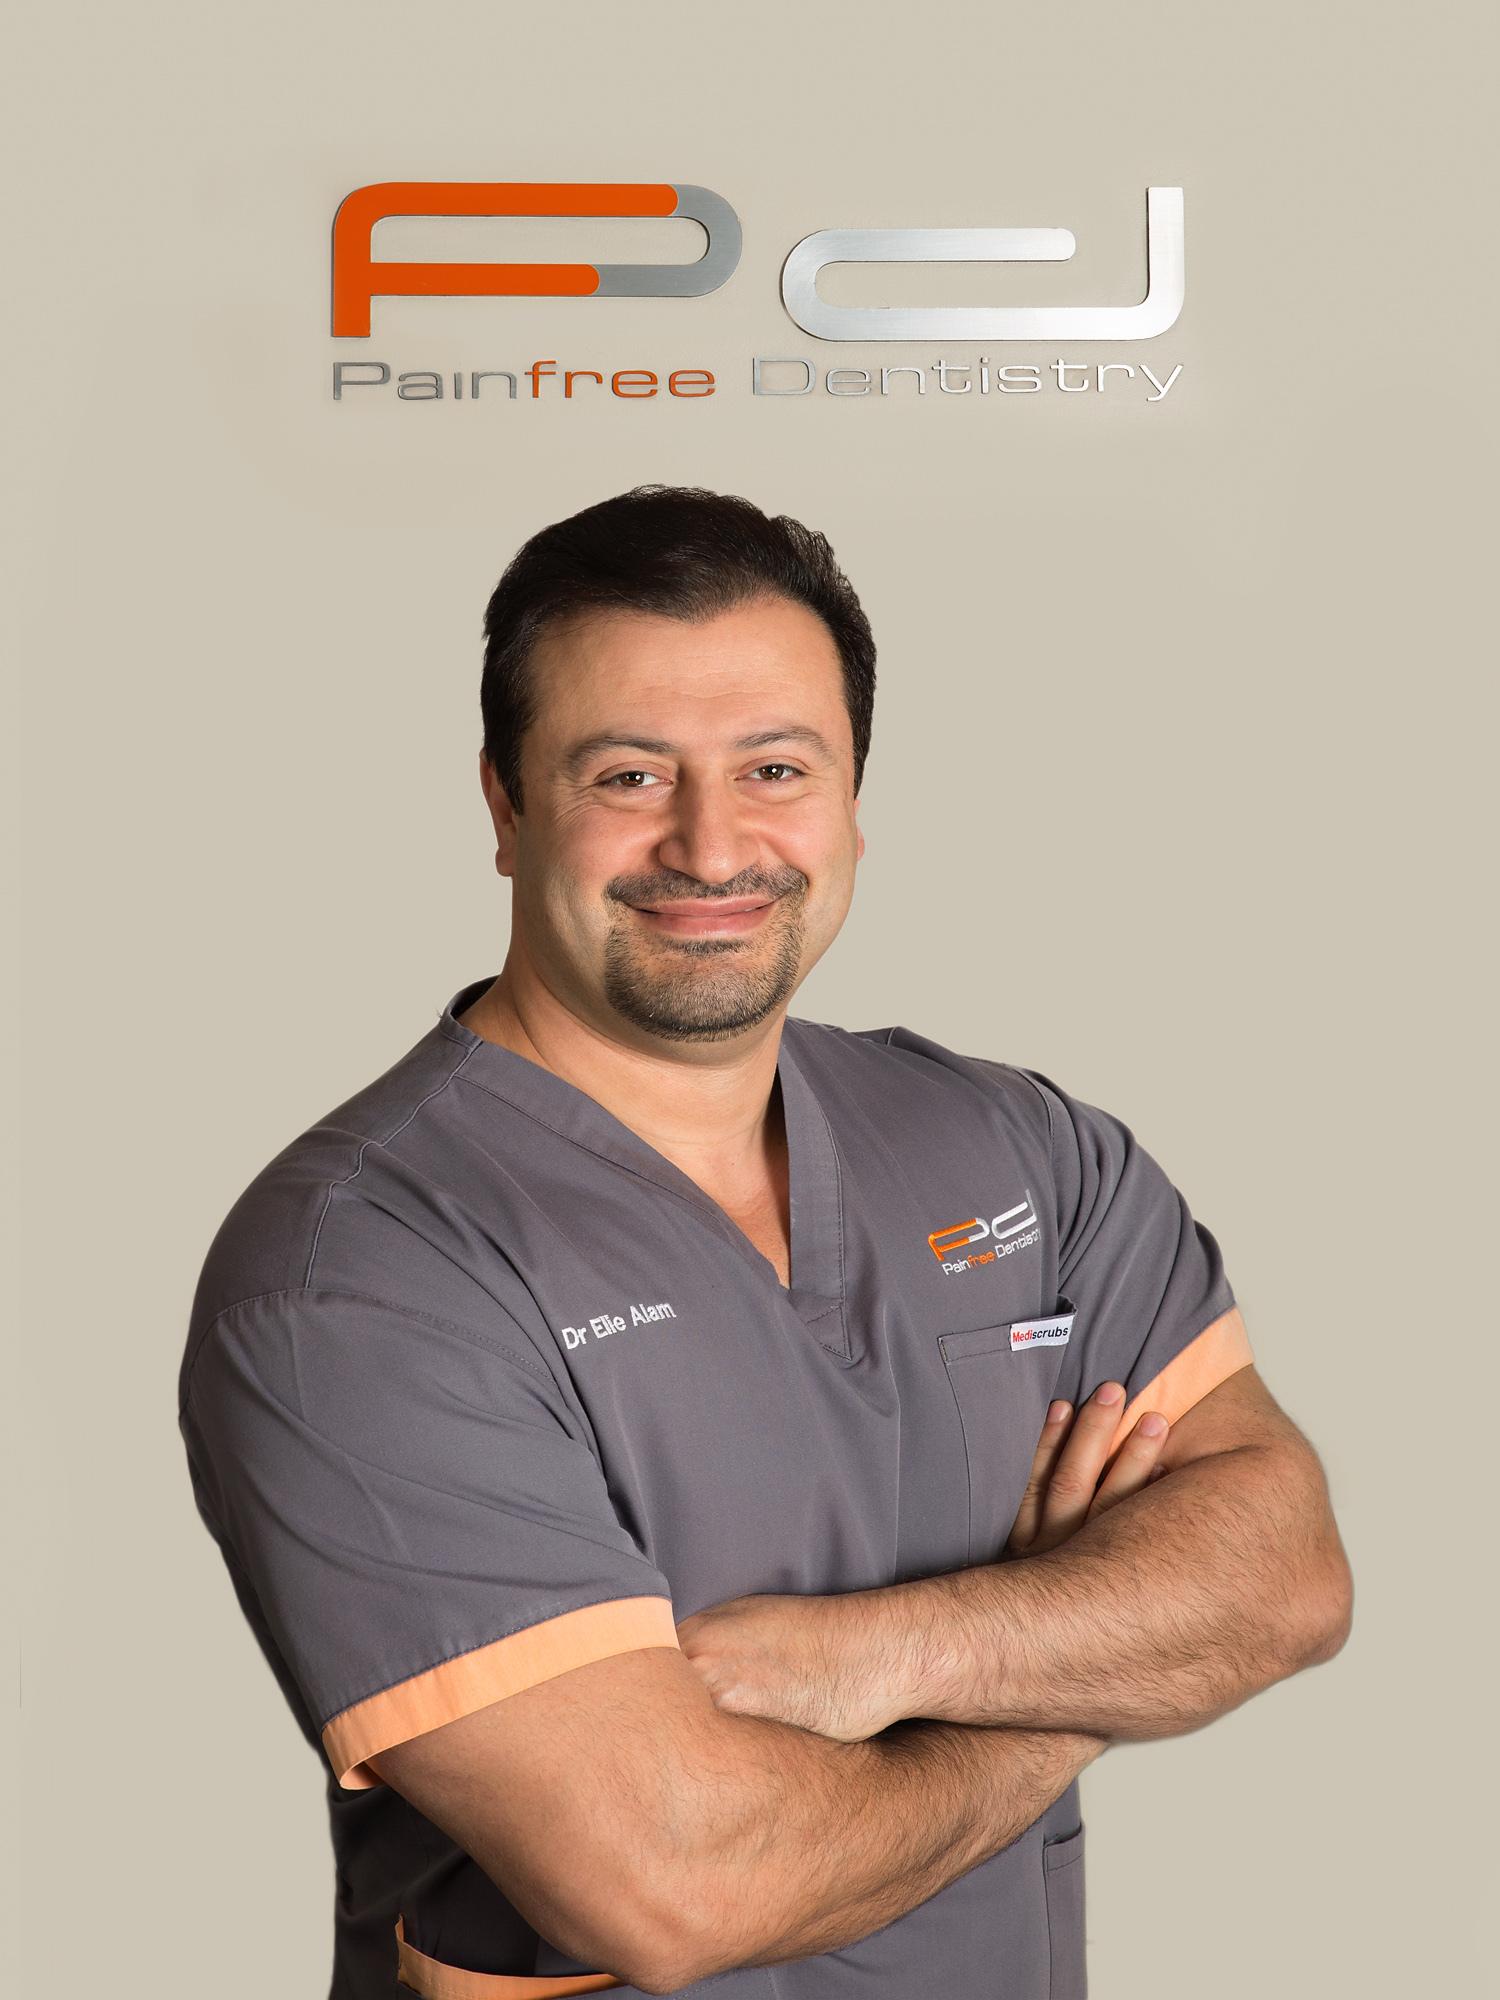 Images Painfree Dentistry